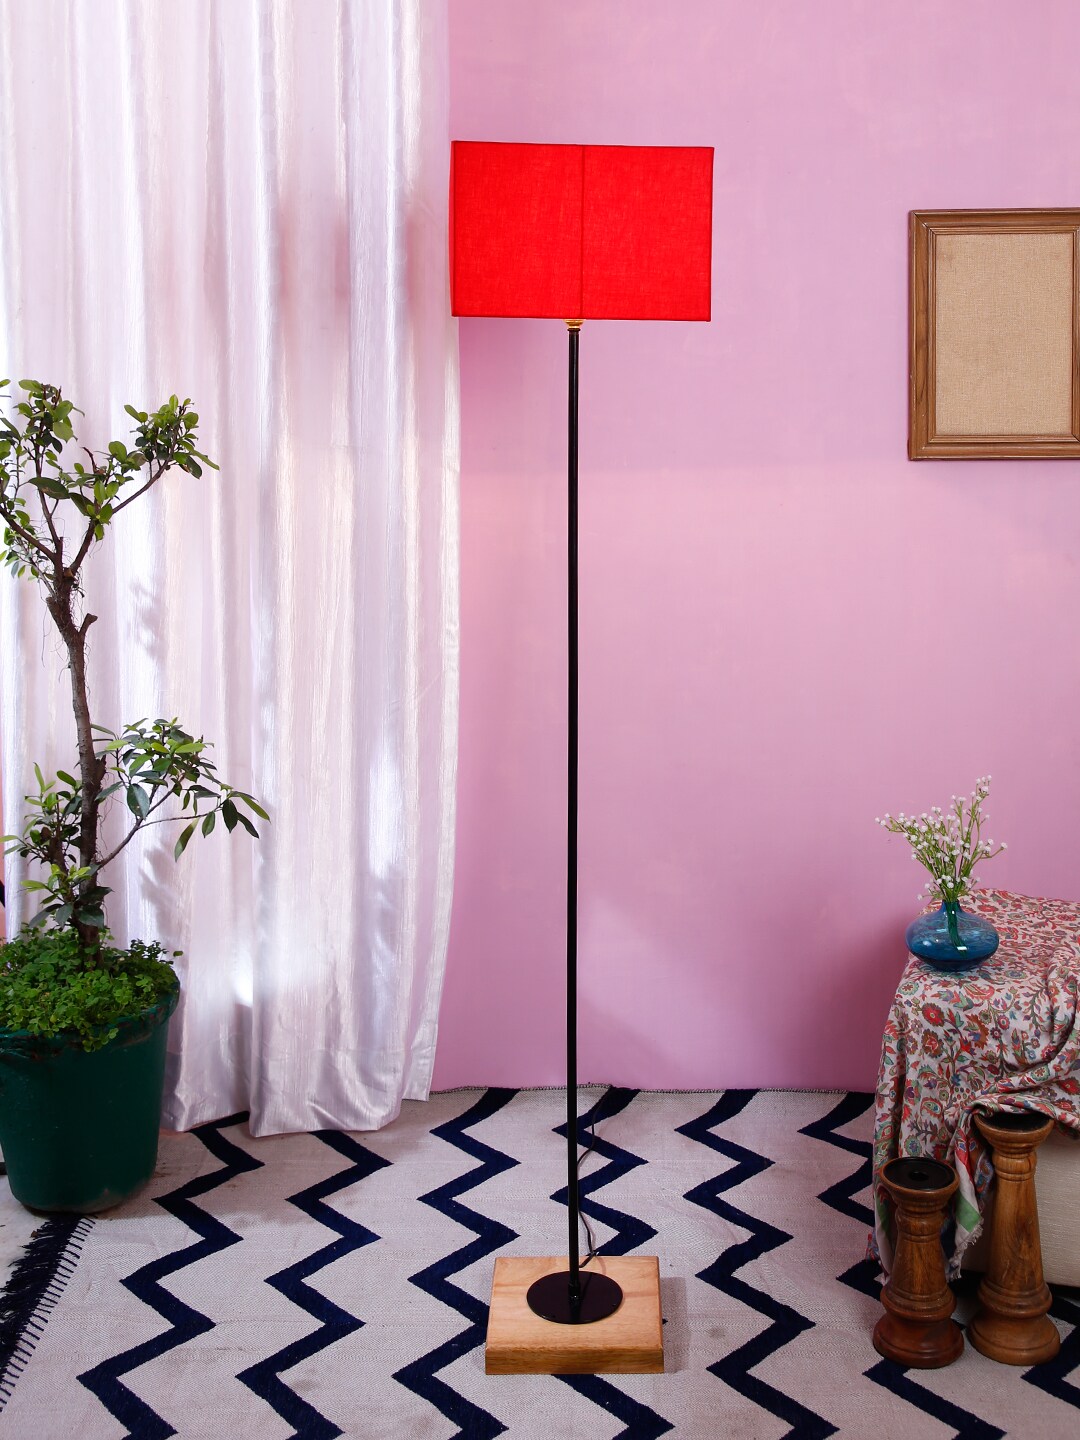 Devansh Red & Black Solid Traditional Club Lamp with Shade Price in India